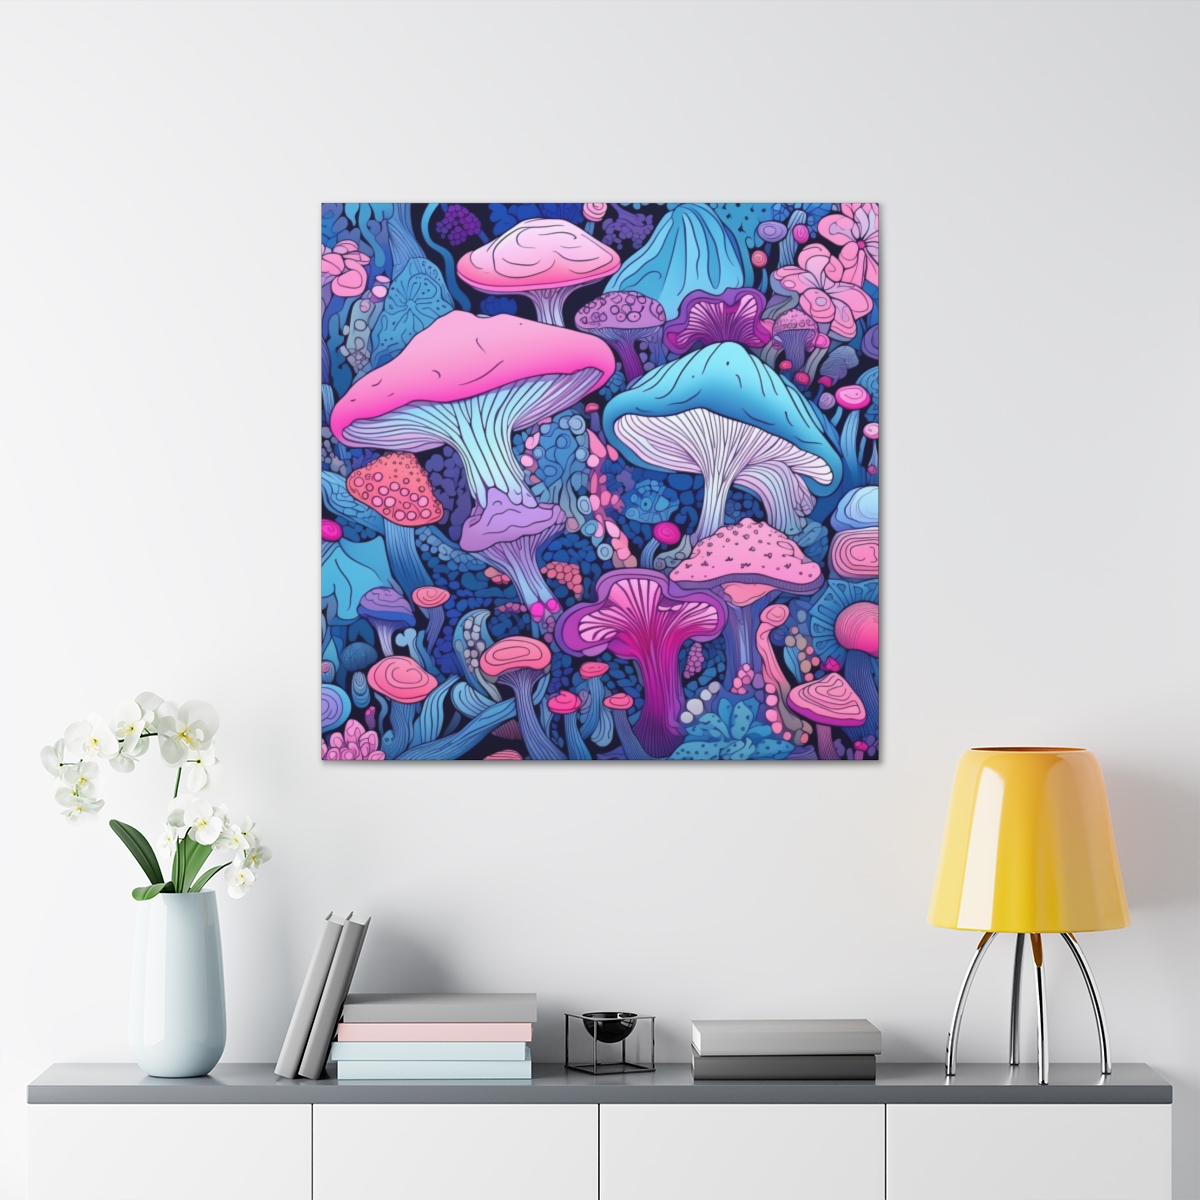 Psychedelic Mushroom Trippy Art: Forest Of Magic Shrooms